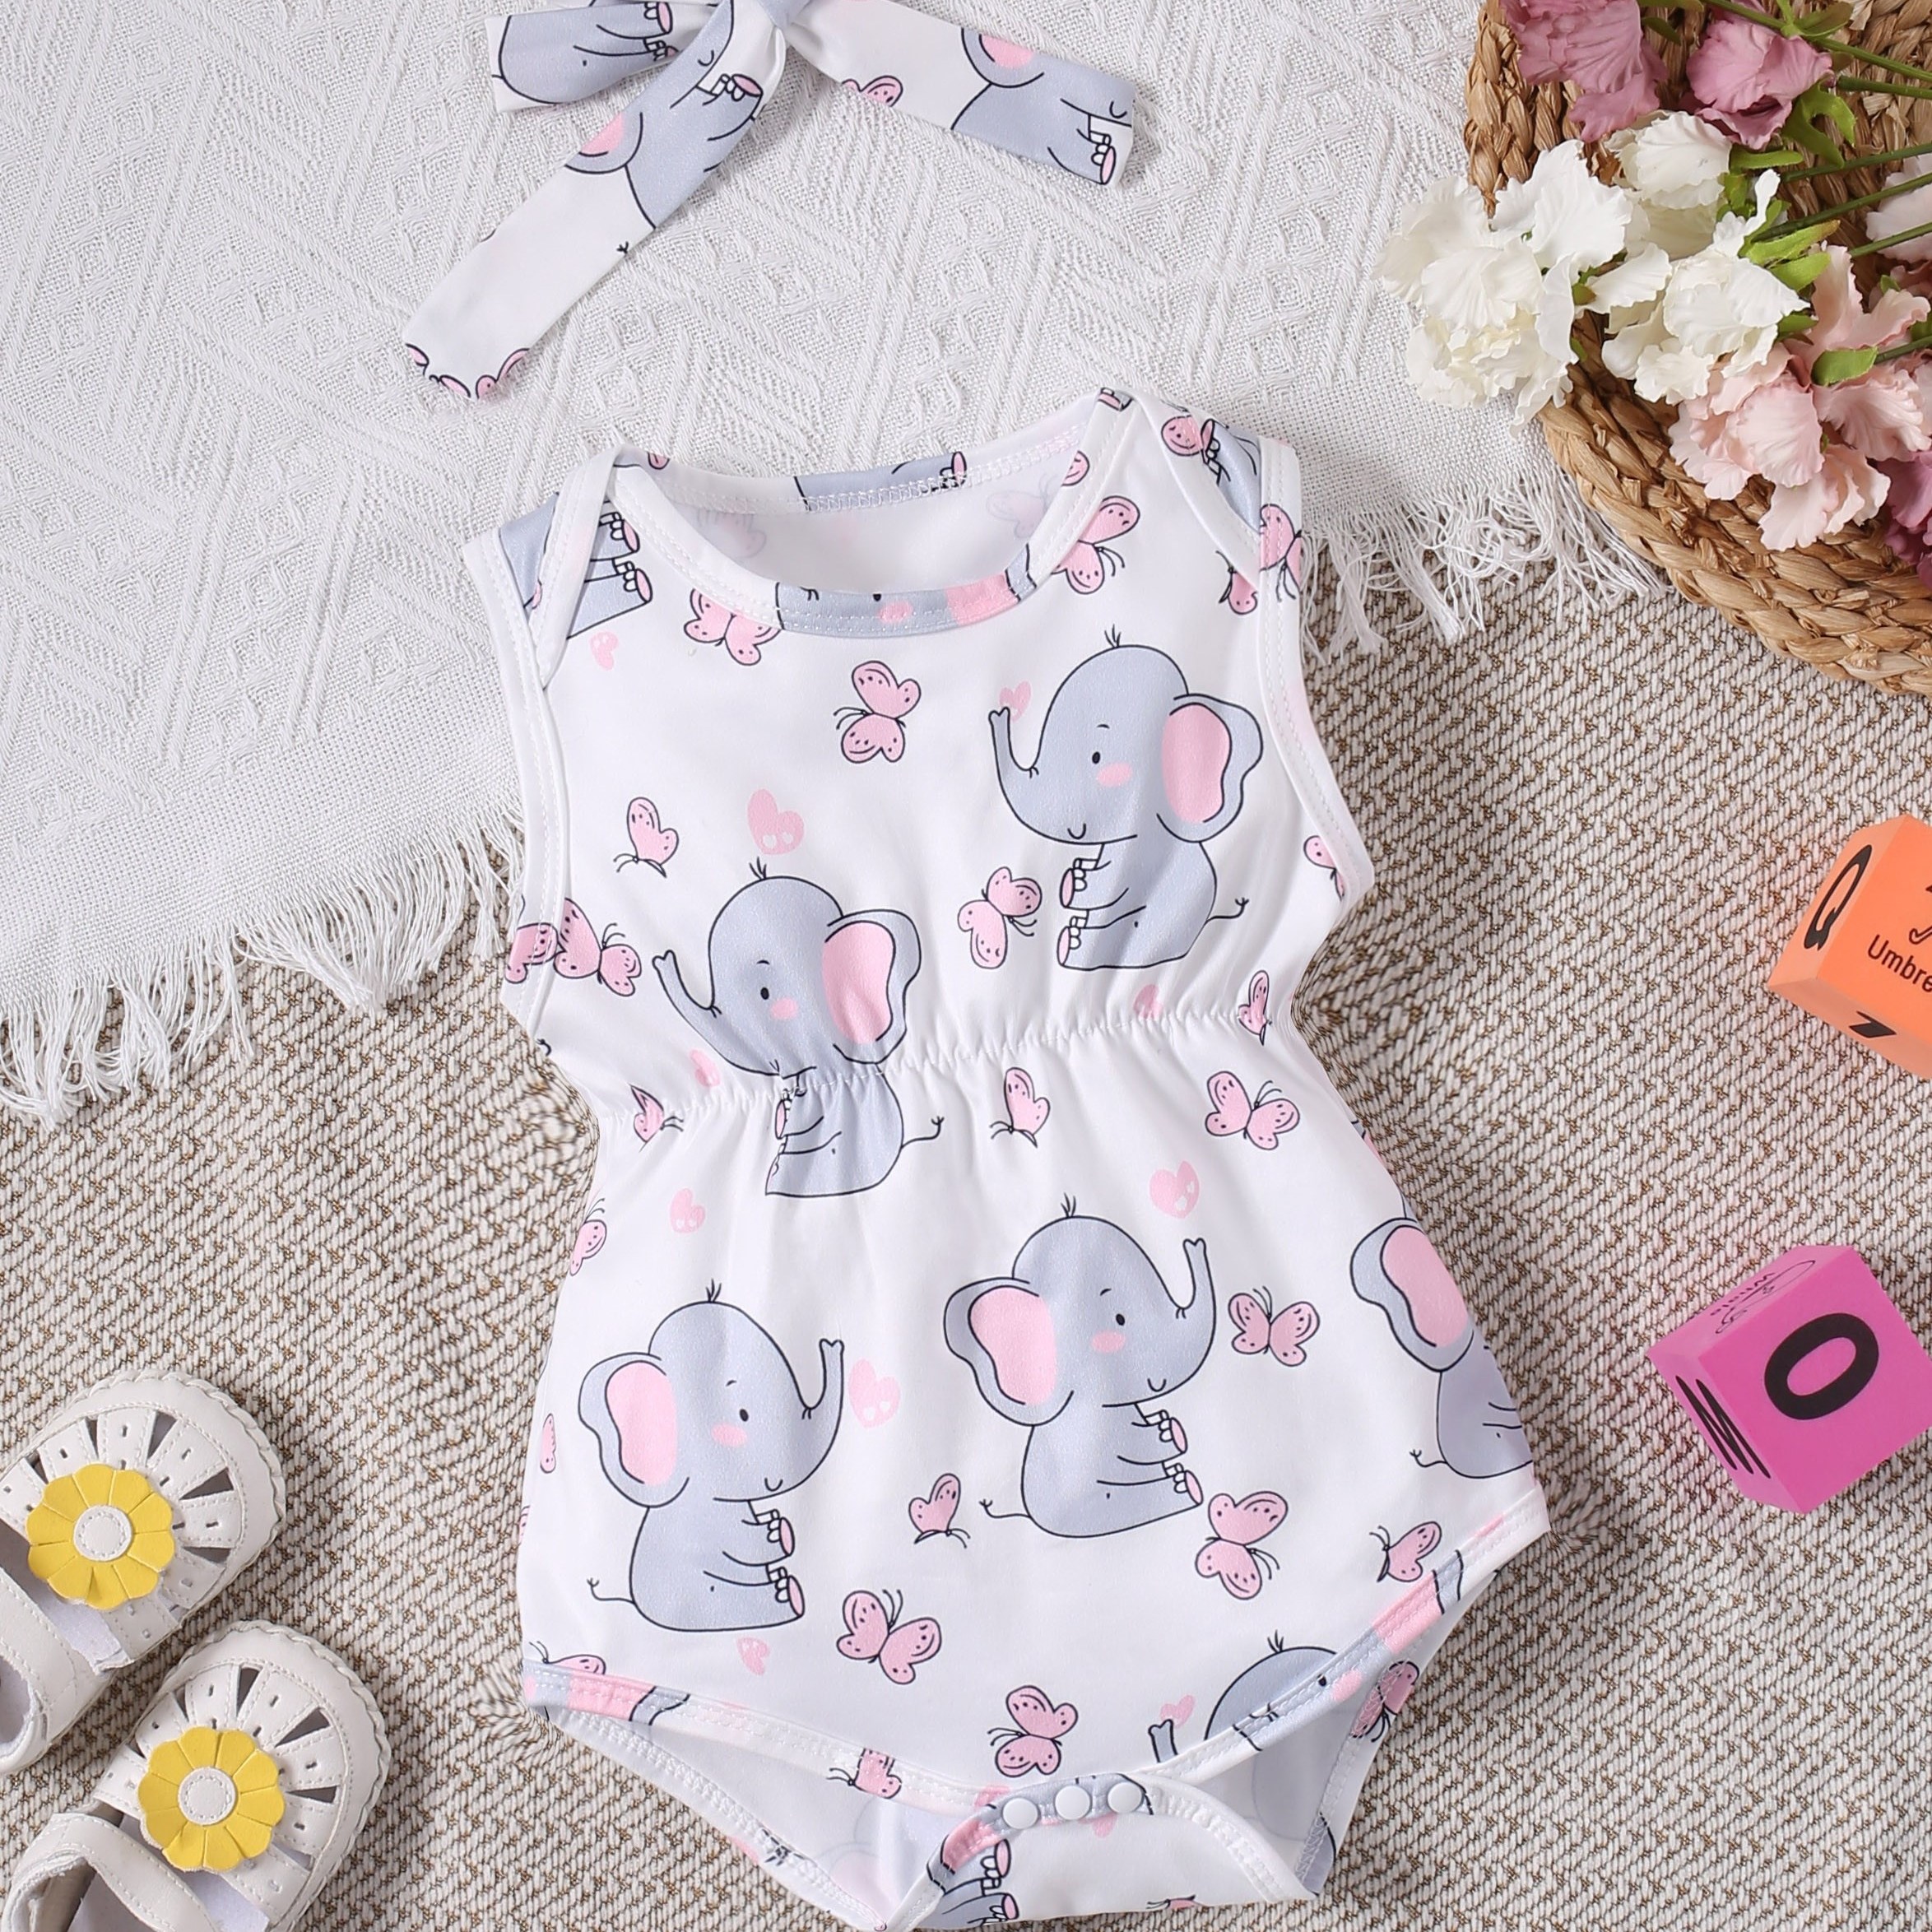 

Infant's Cute Elephant & Butterfly Pattern Bodysuit, Casual Sleeveless Onesie, Baby Girl's Clothing